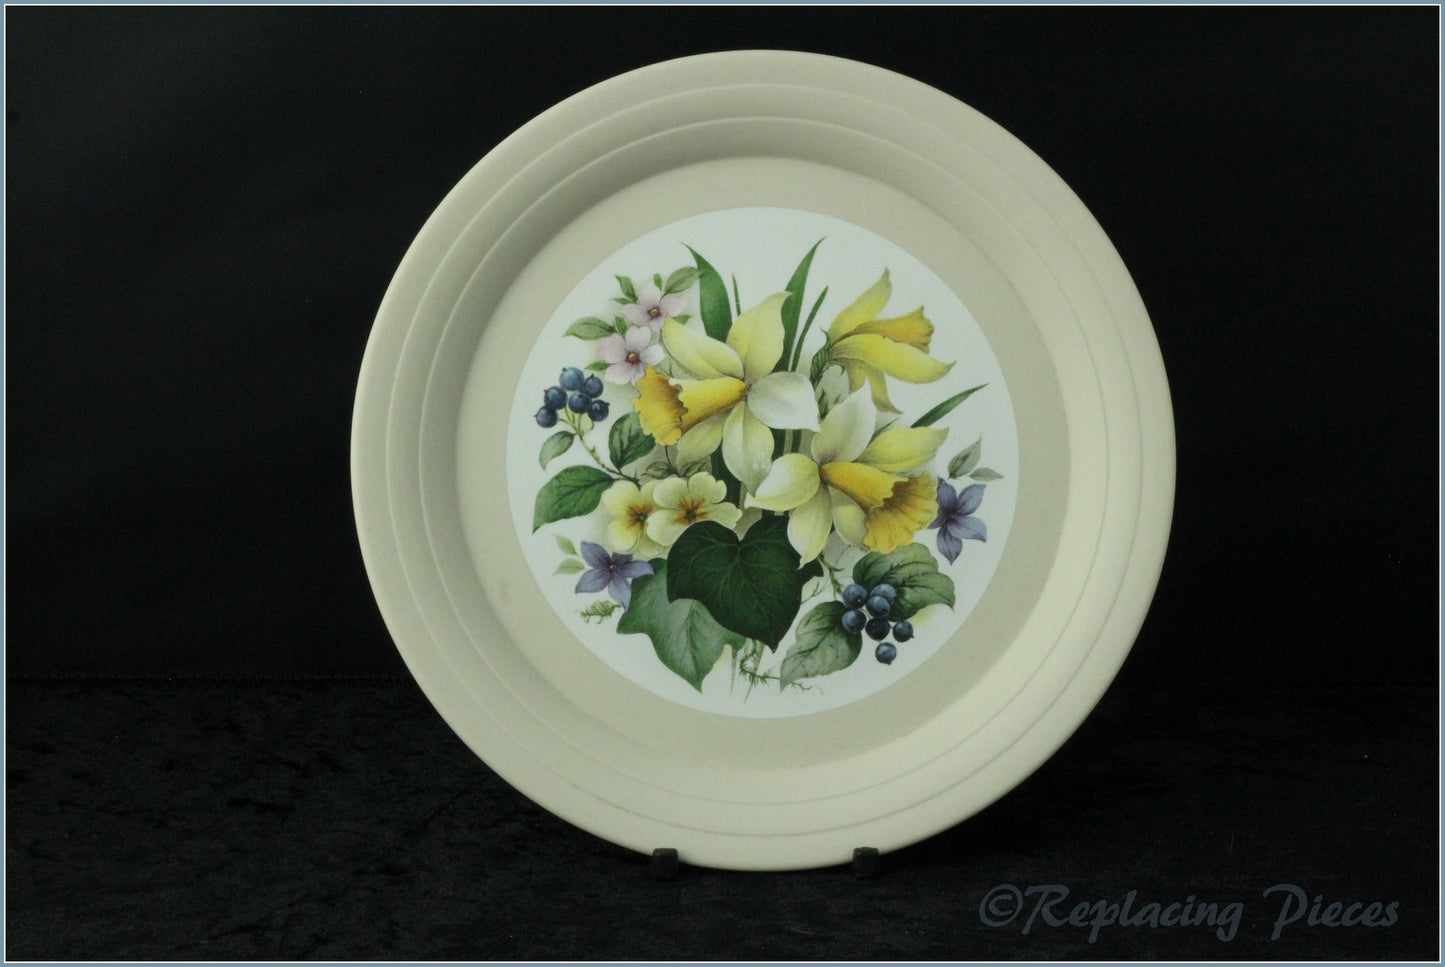 Hornsea - Collector Plate - Flowers